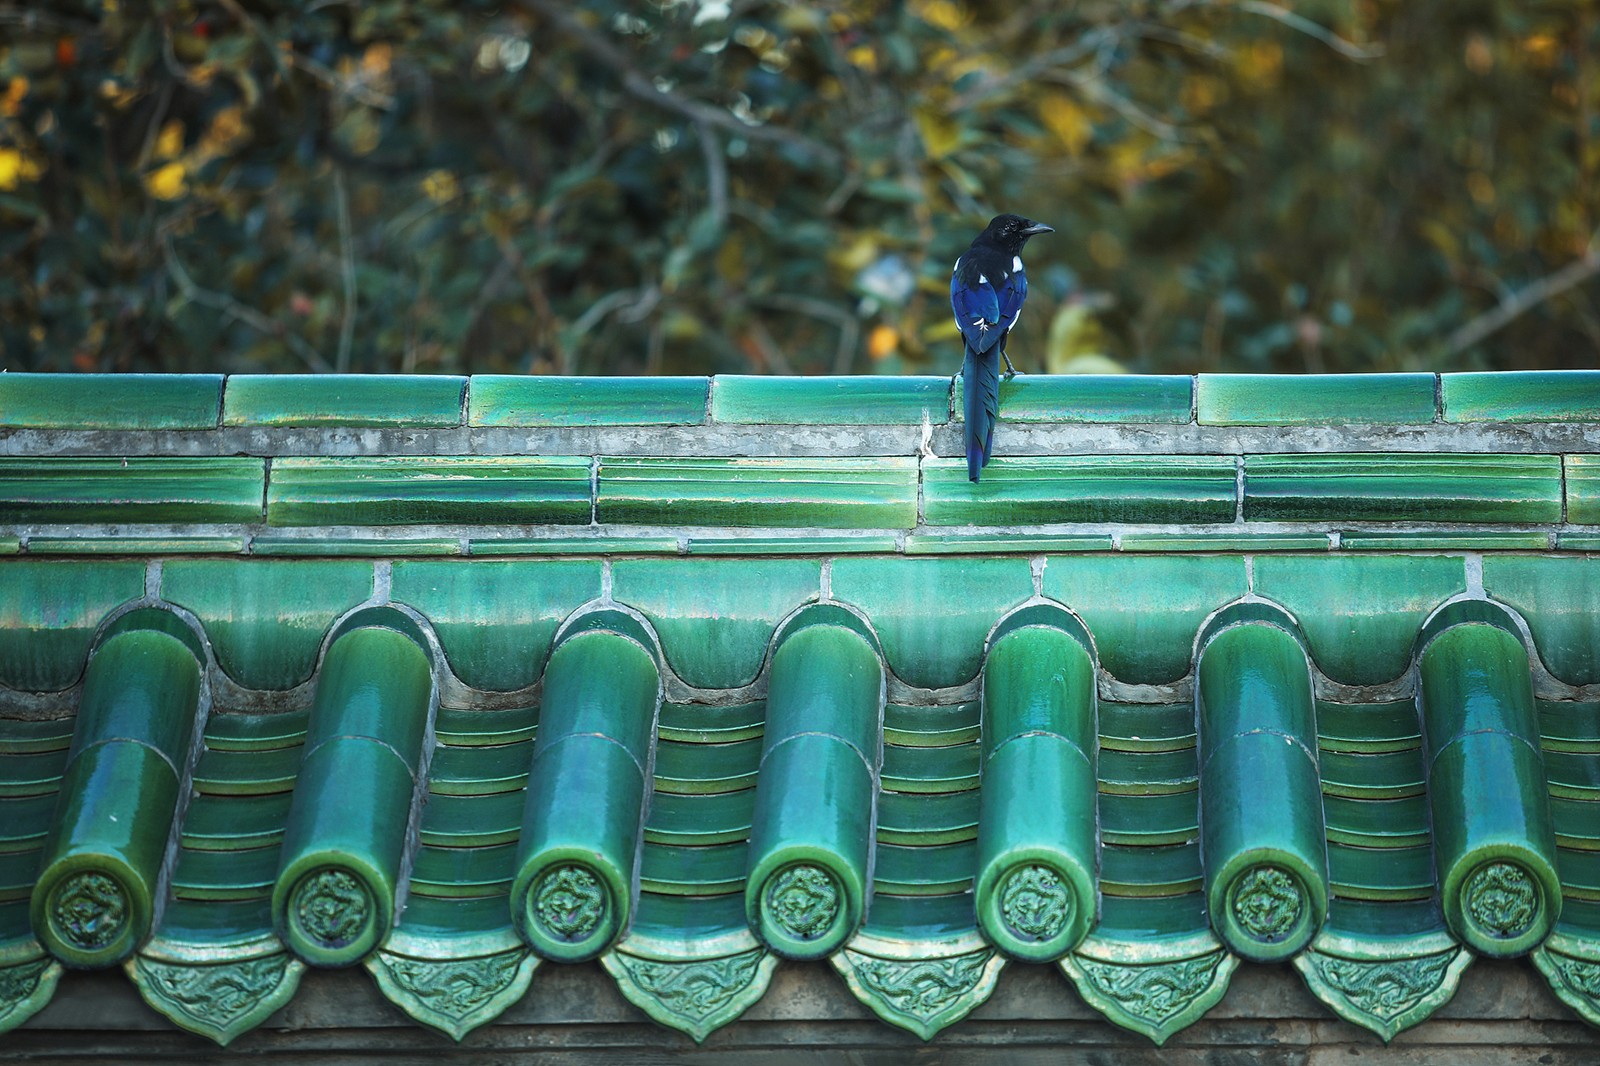 A bird sits on the green glazed roof of a building within the Temple of Heaven complex in Beijing. /CFP